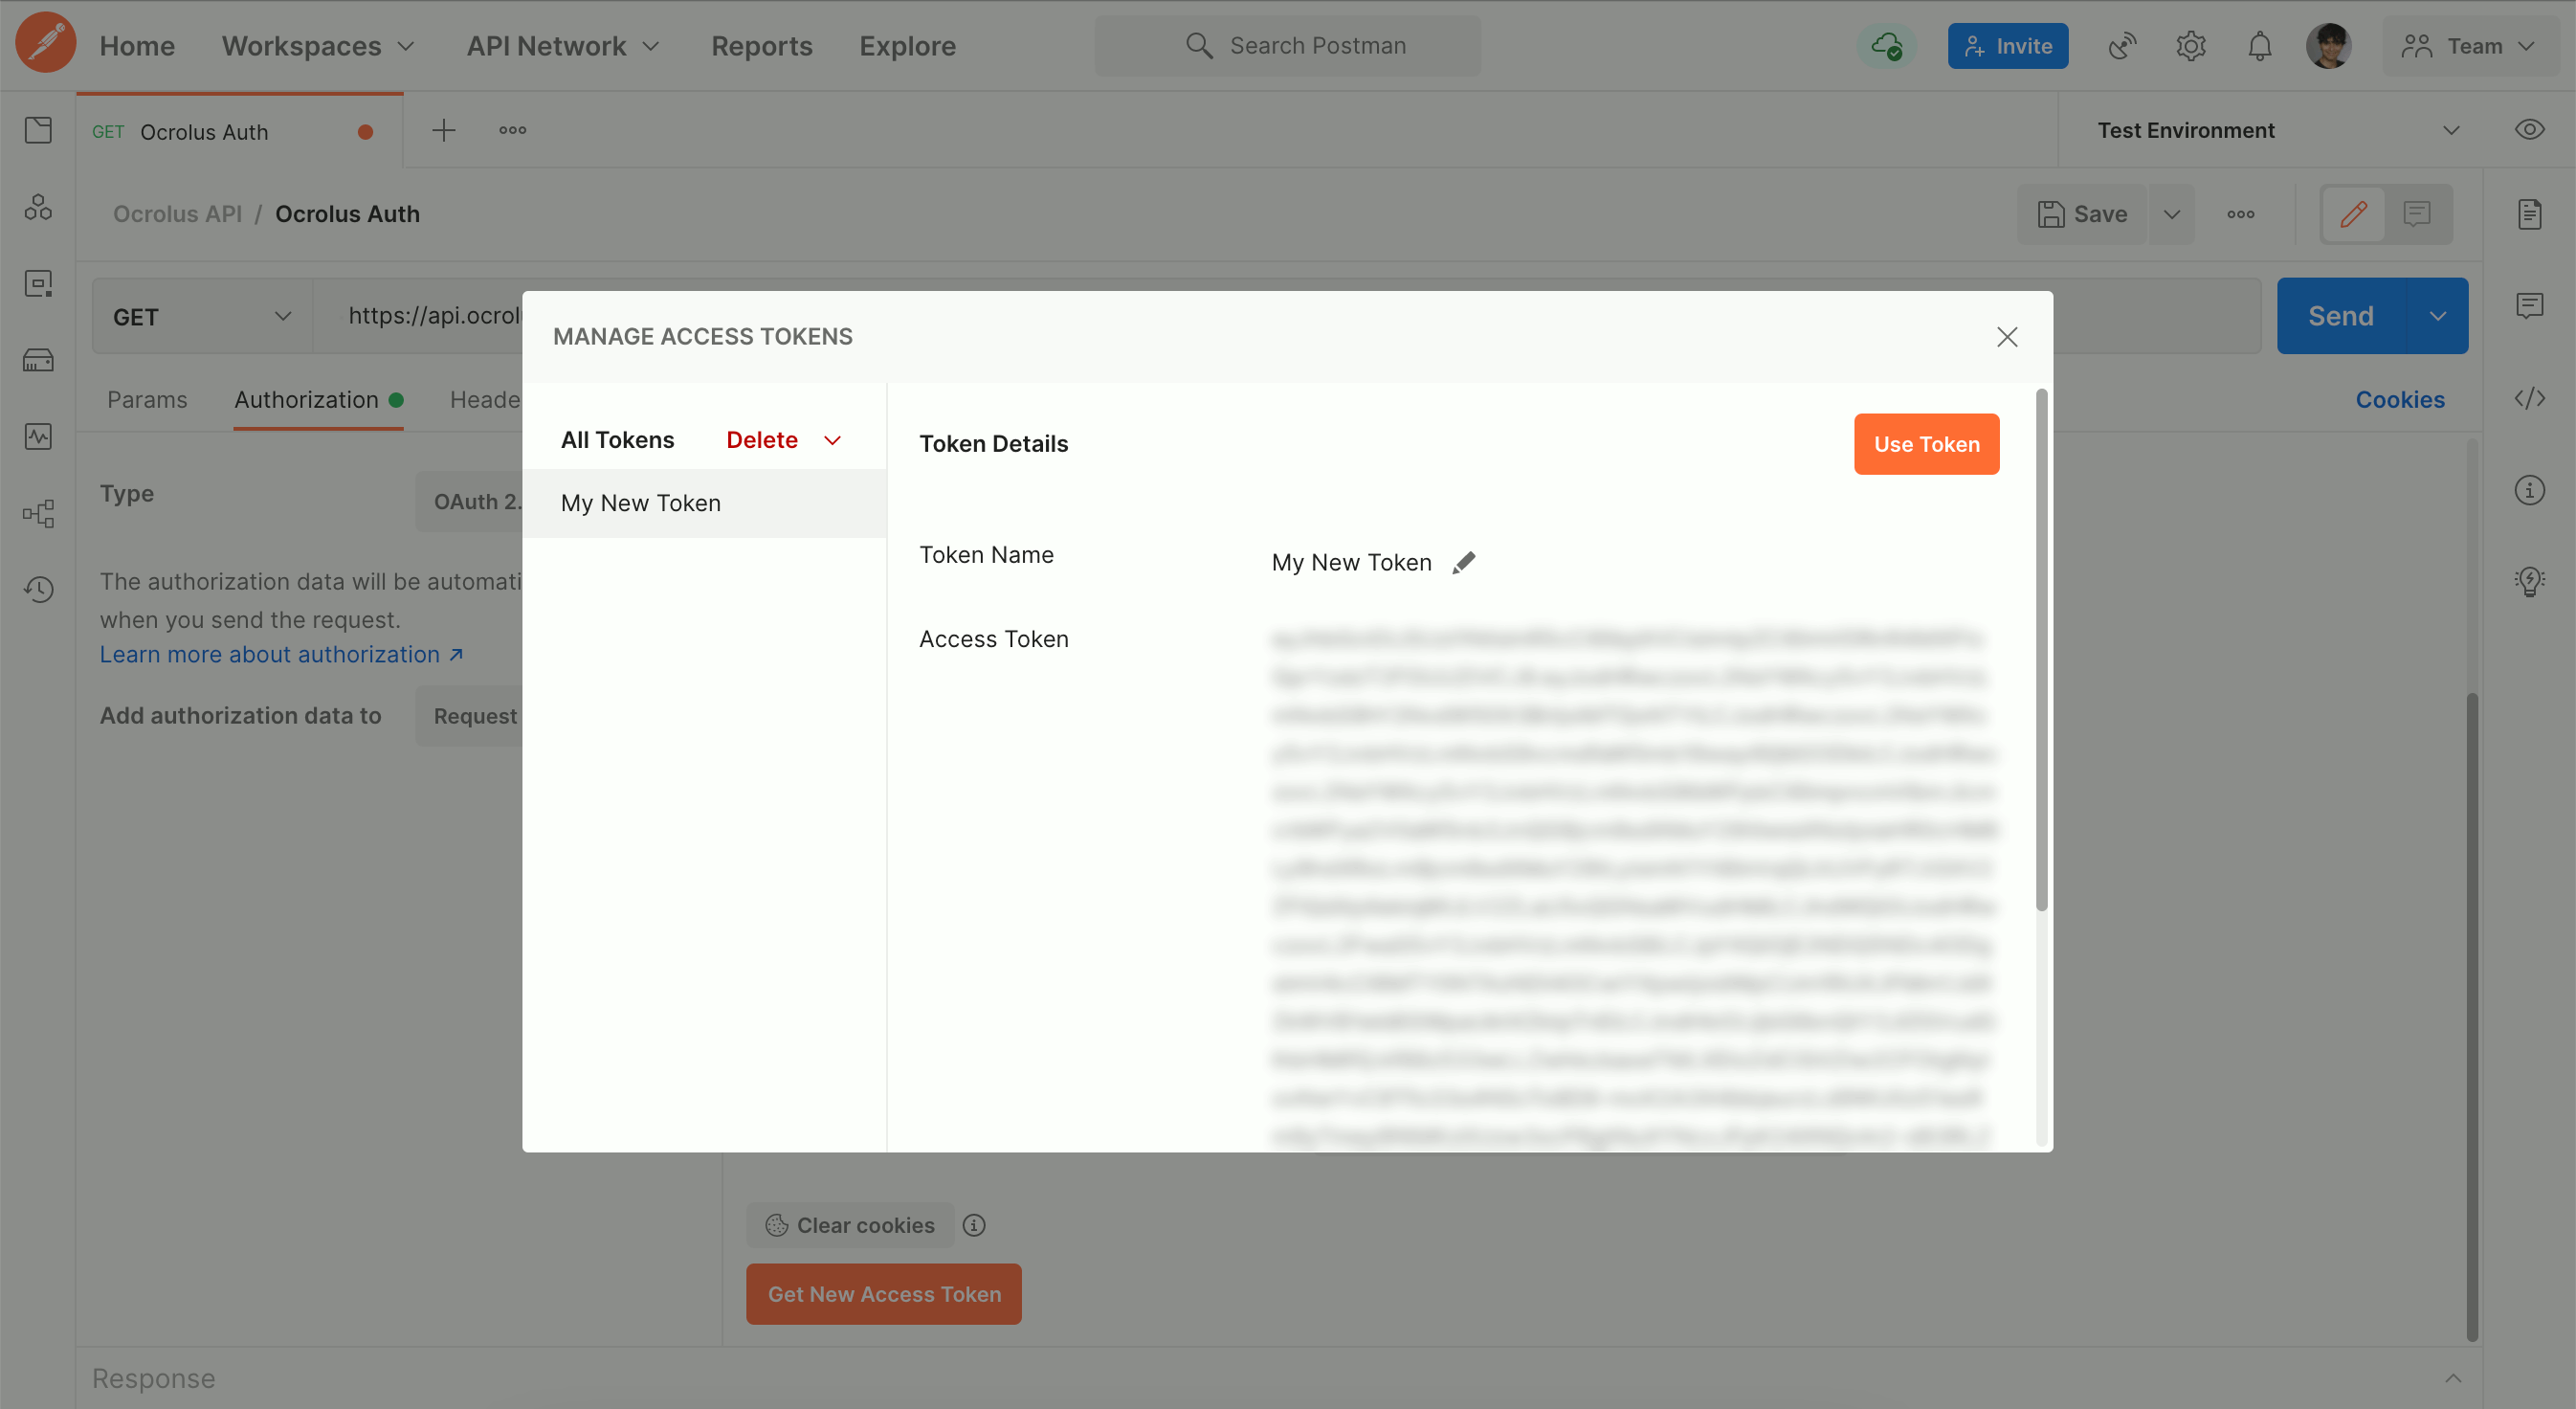 Postman displaying the access token it received from Ocrolus. Various attributes are also provided, though they're not included in this screenshot. The token is blurred to indicate that it is considered sensitive.